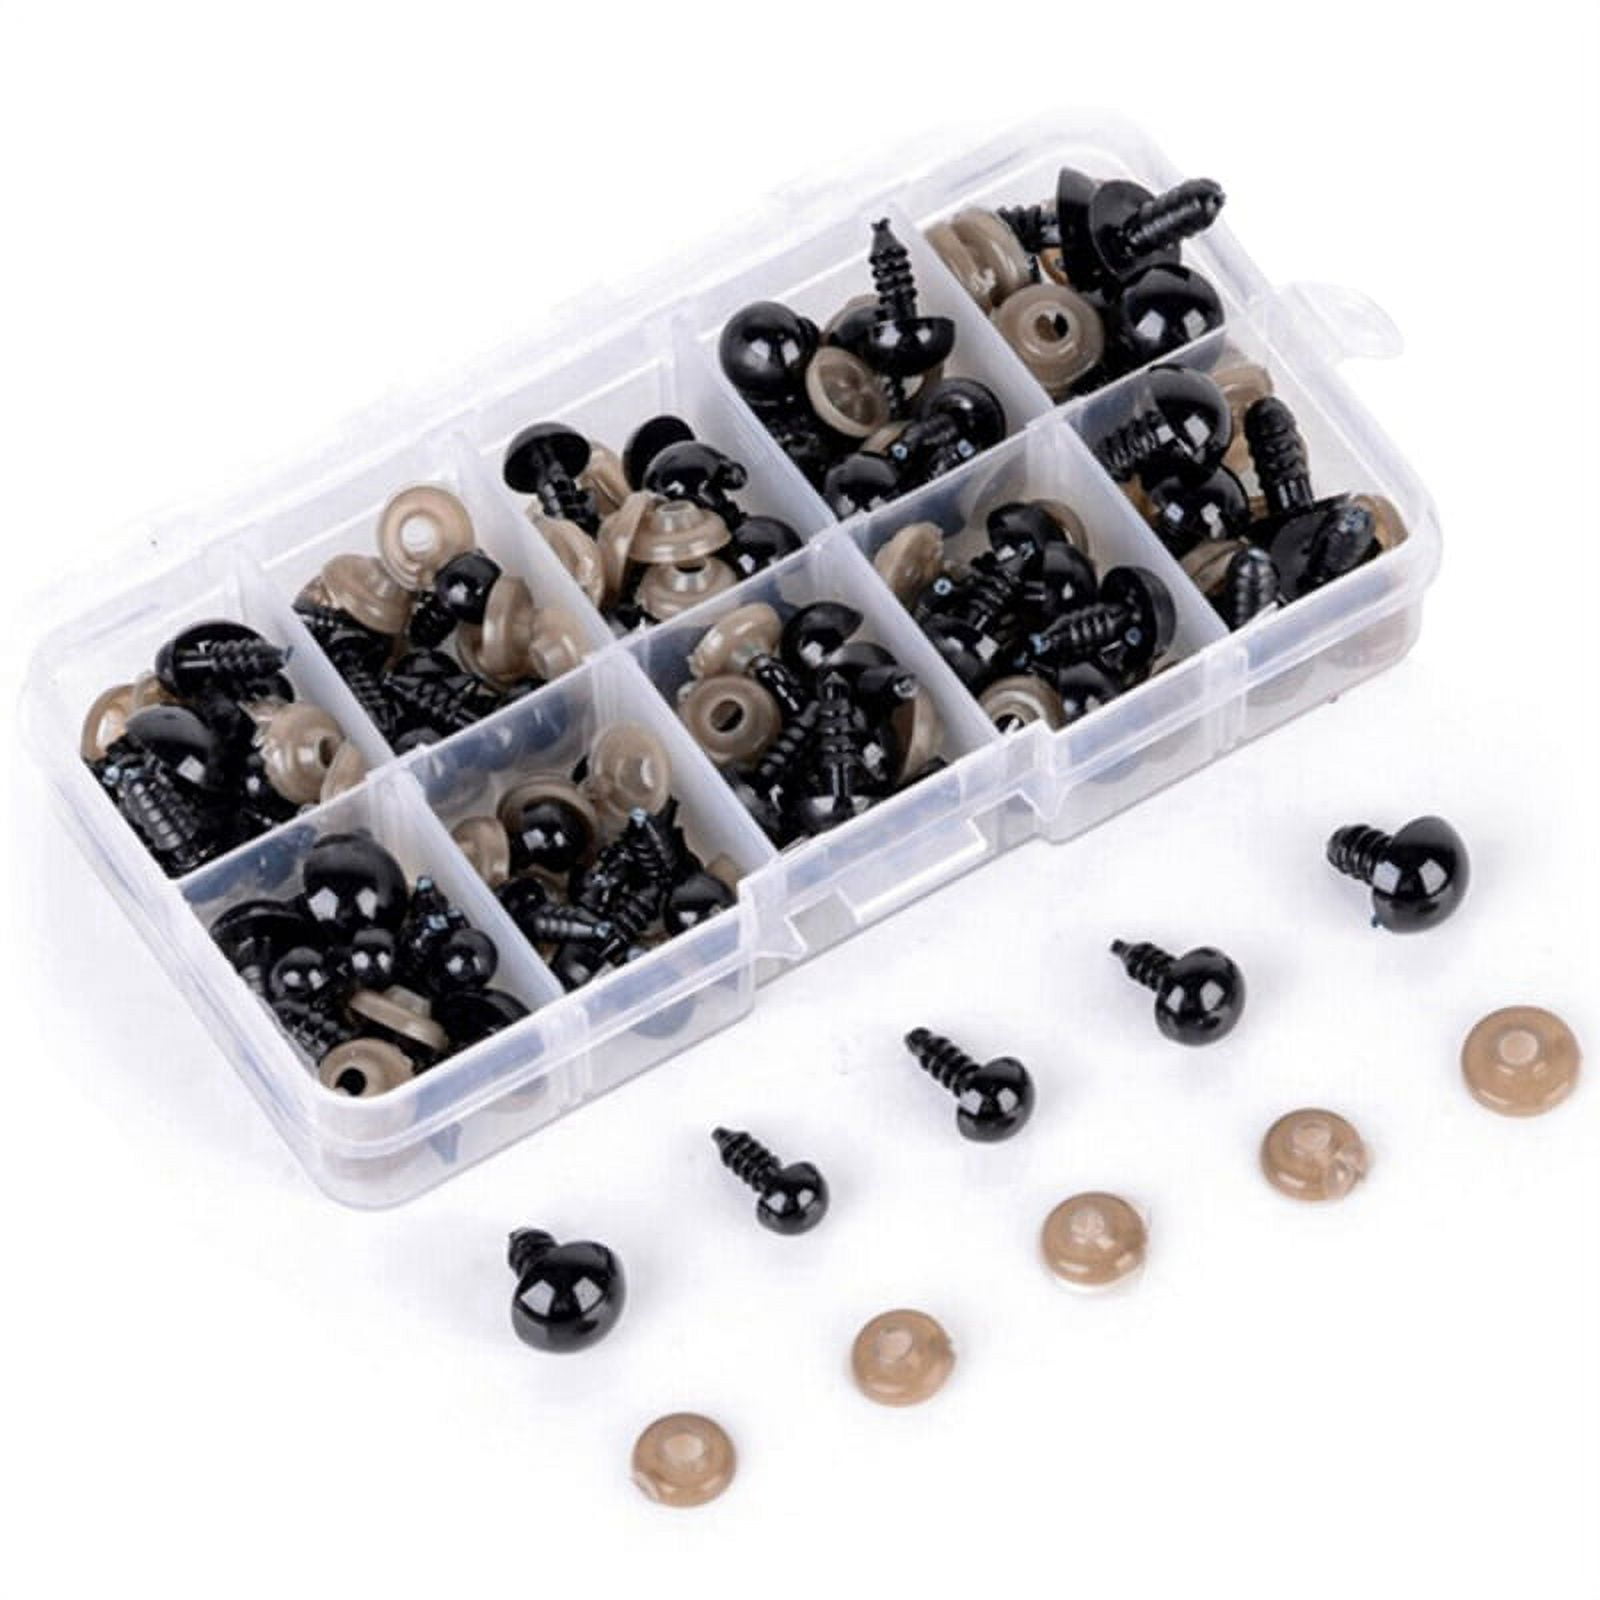 100pcs 6mm - 12mm Safety Eyes, Black Plastic Large Doll Eyes for Amigurumi, DIY of Puppet, Teddy Bear Crafts, Crochet Toy and Stuffed Animals